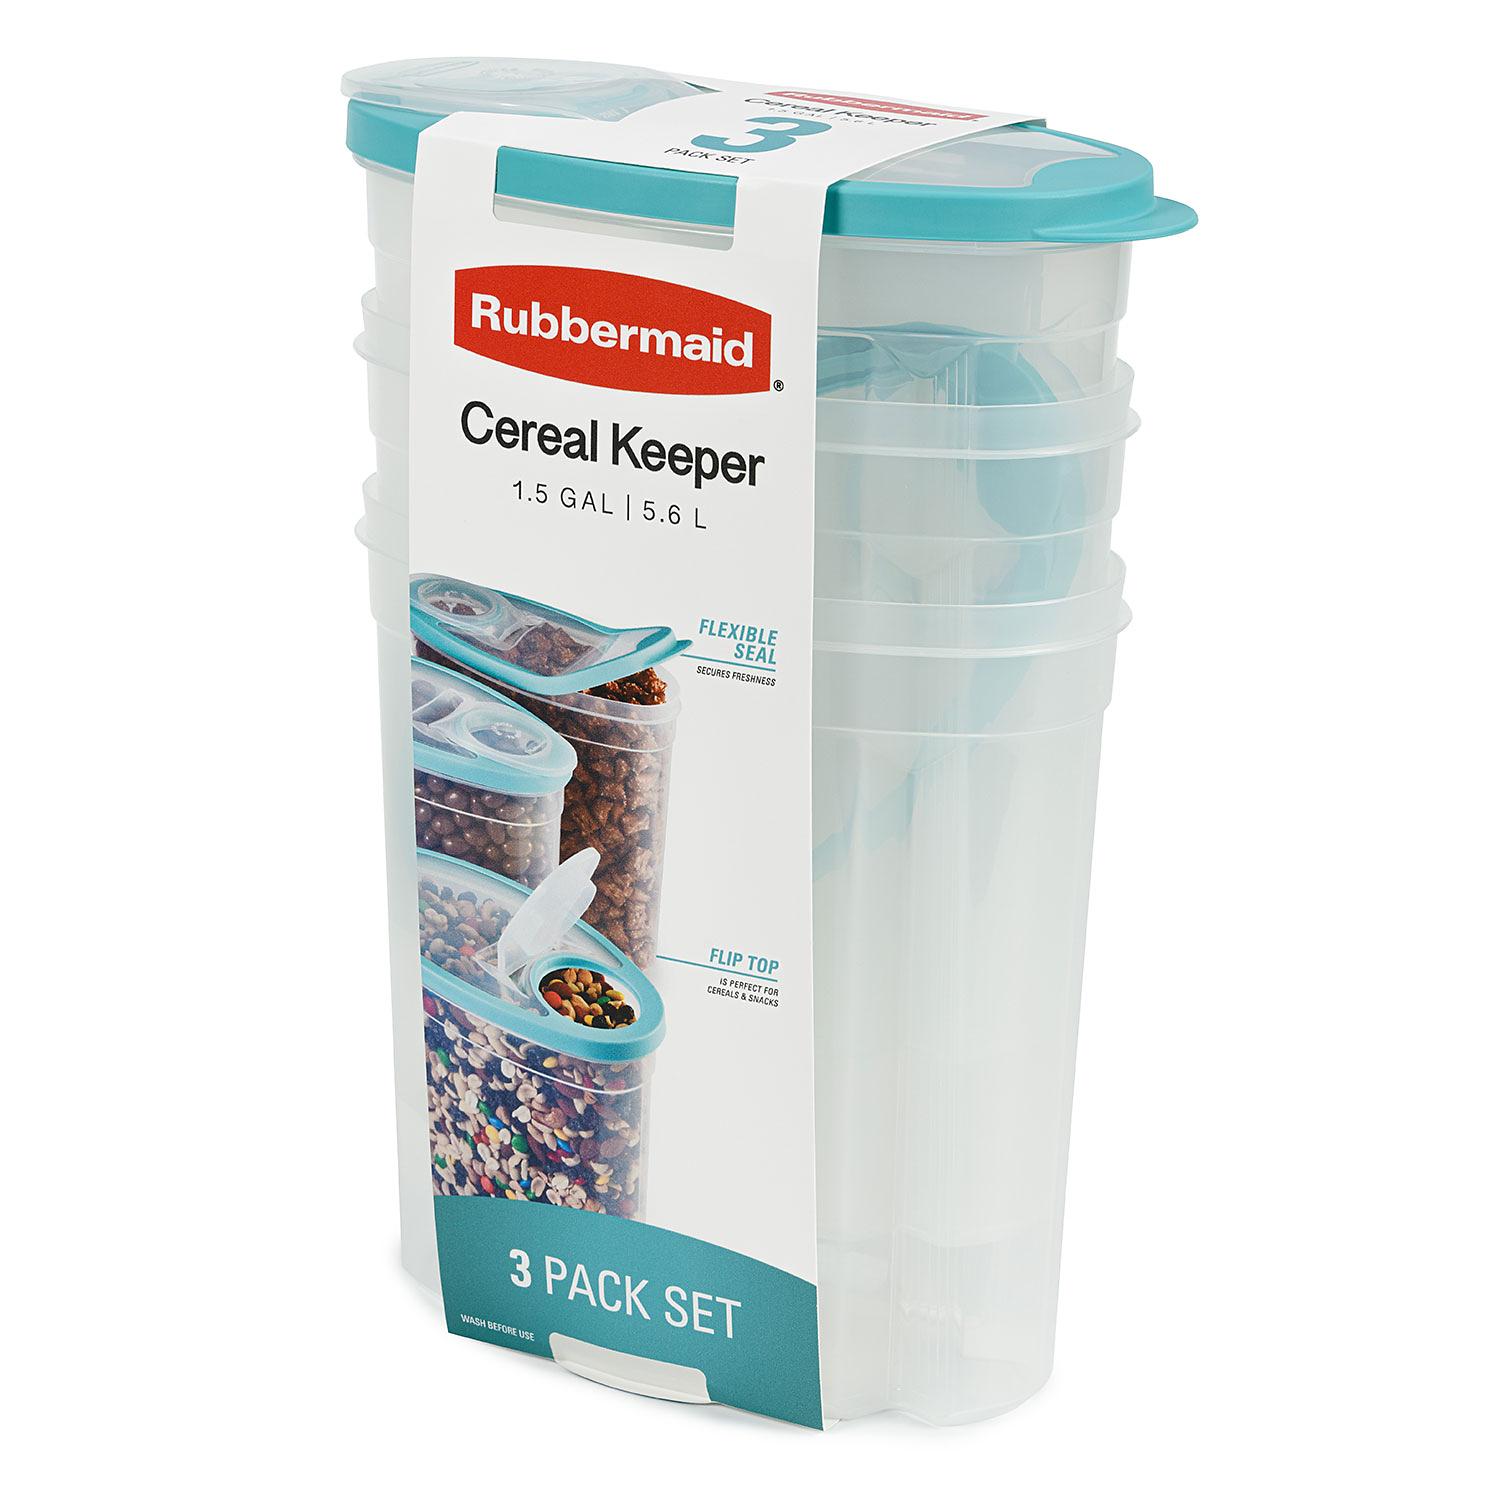 Buy Rubbermaid Cereal Keeper Food Storage Container 1.5 Gal.